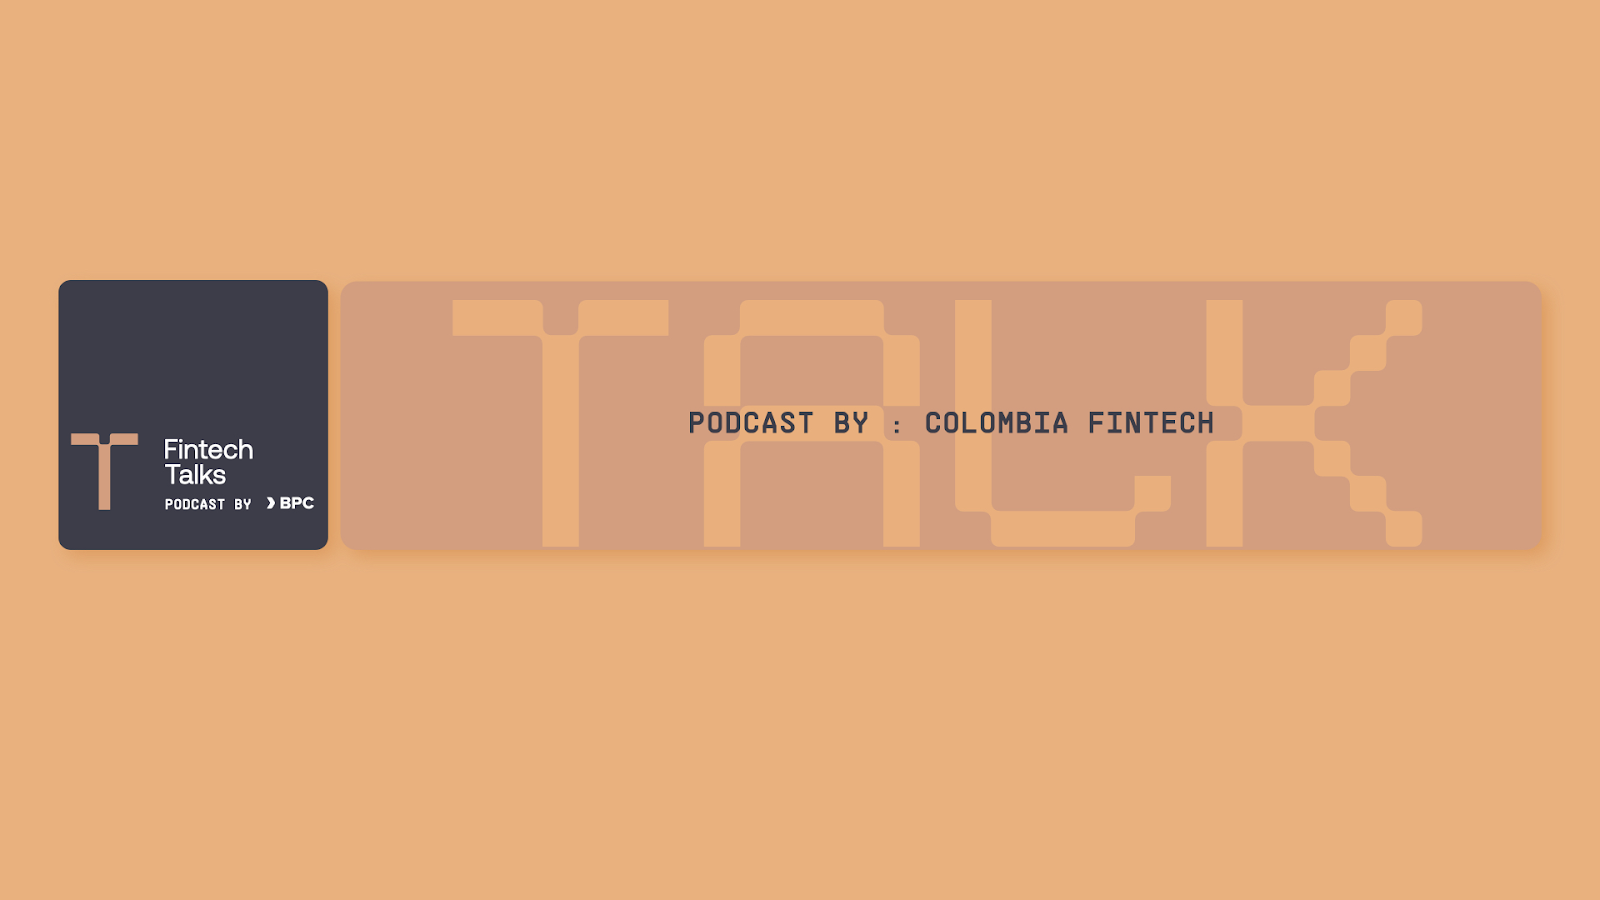 Artifact from the Transforming Fintech: Colombia's Branding Evolution article on Abduzeedo